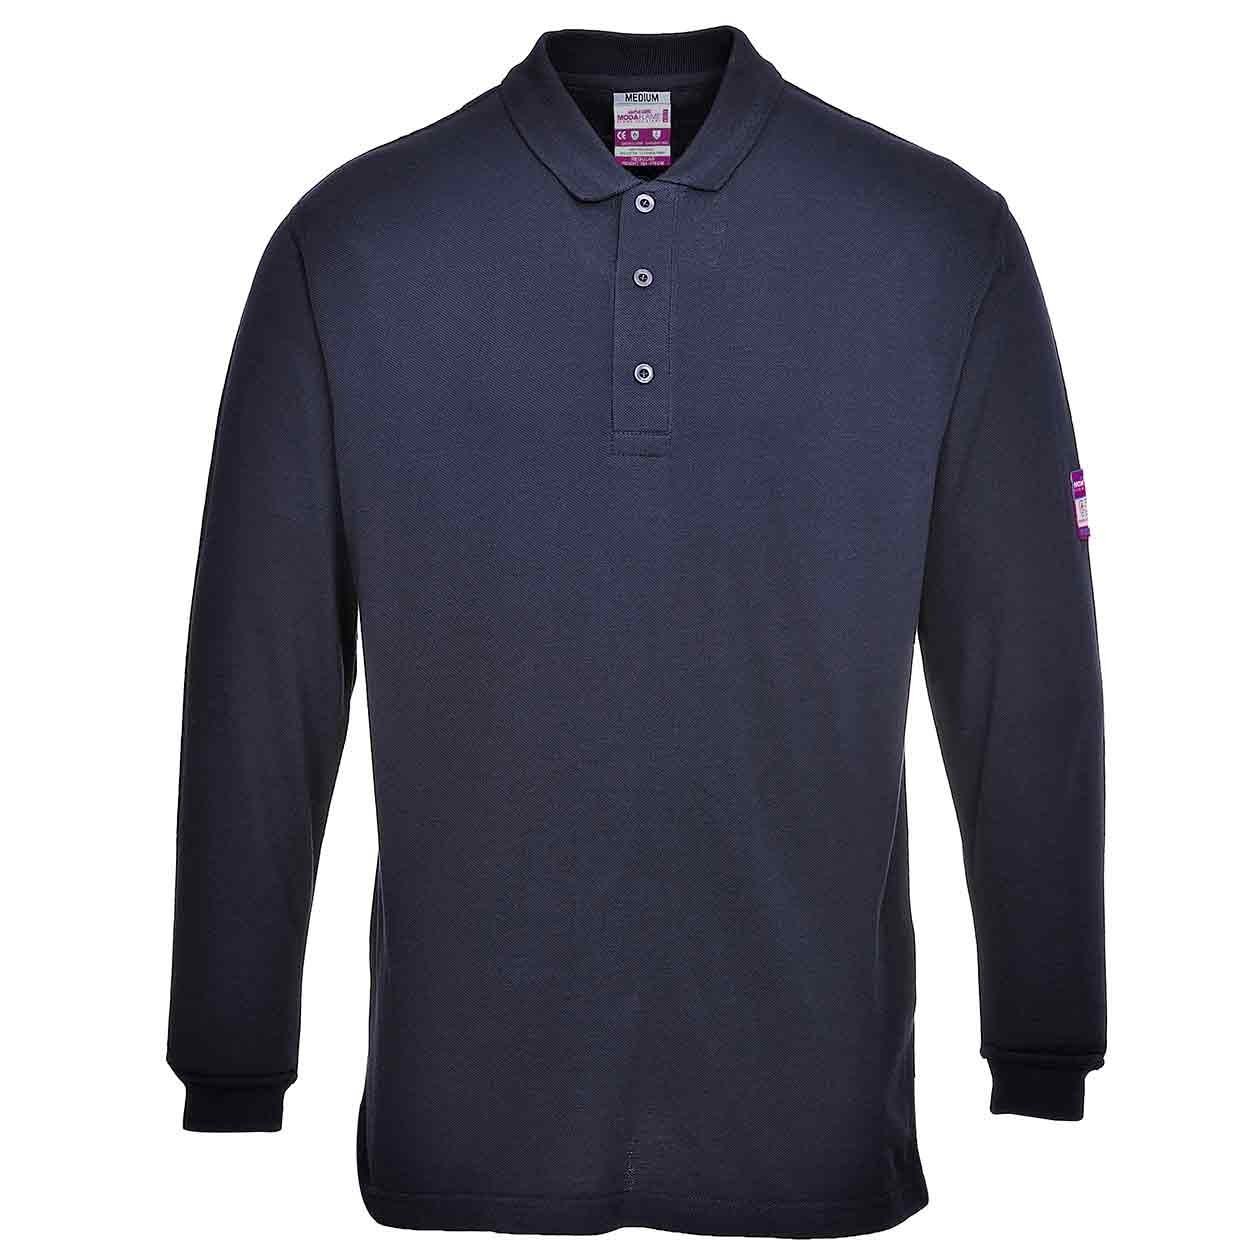 Portwest FR10 Flame-Resistant Anti-Static Long Sleeve Polo Shirt - Workwear  Polo Shirts & Tees - Workwear Tops - Workwear - Best Workwear